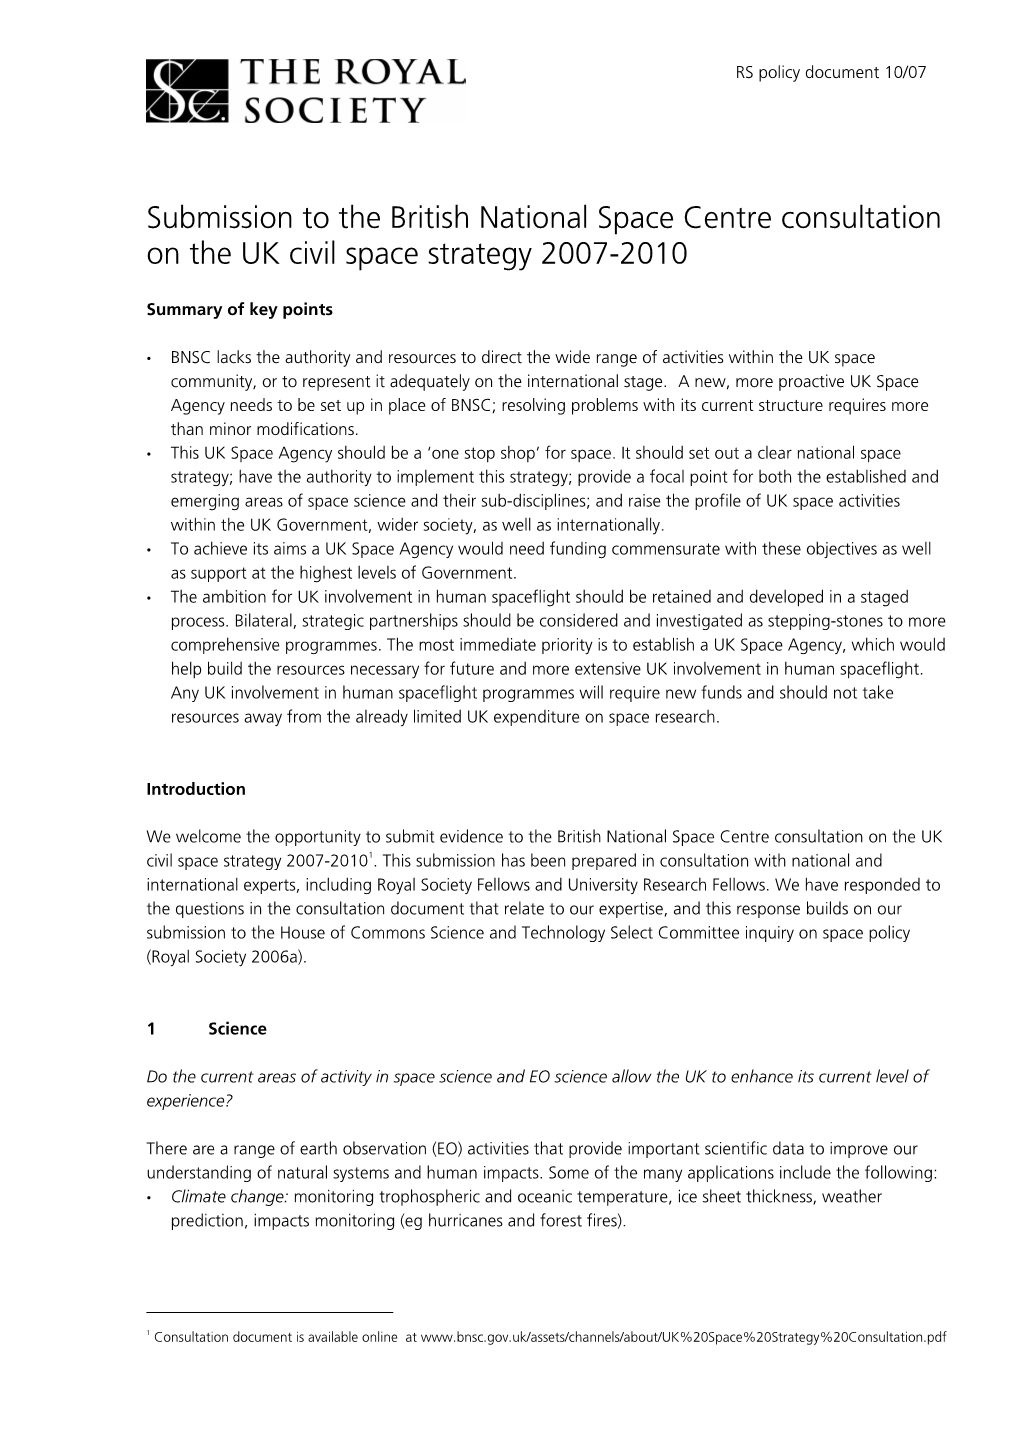 UK Civil Space Strategy